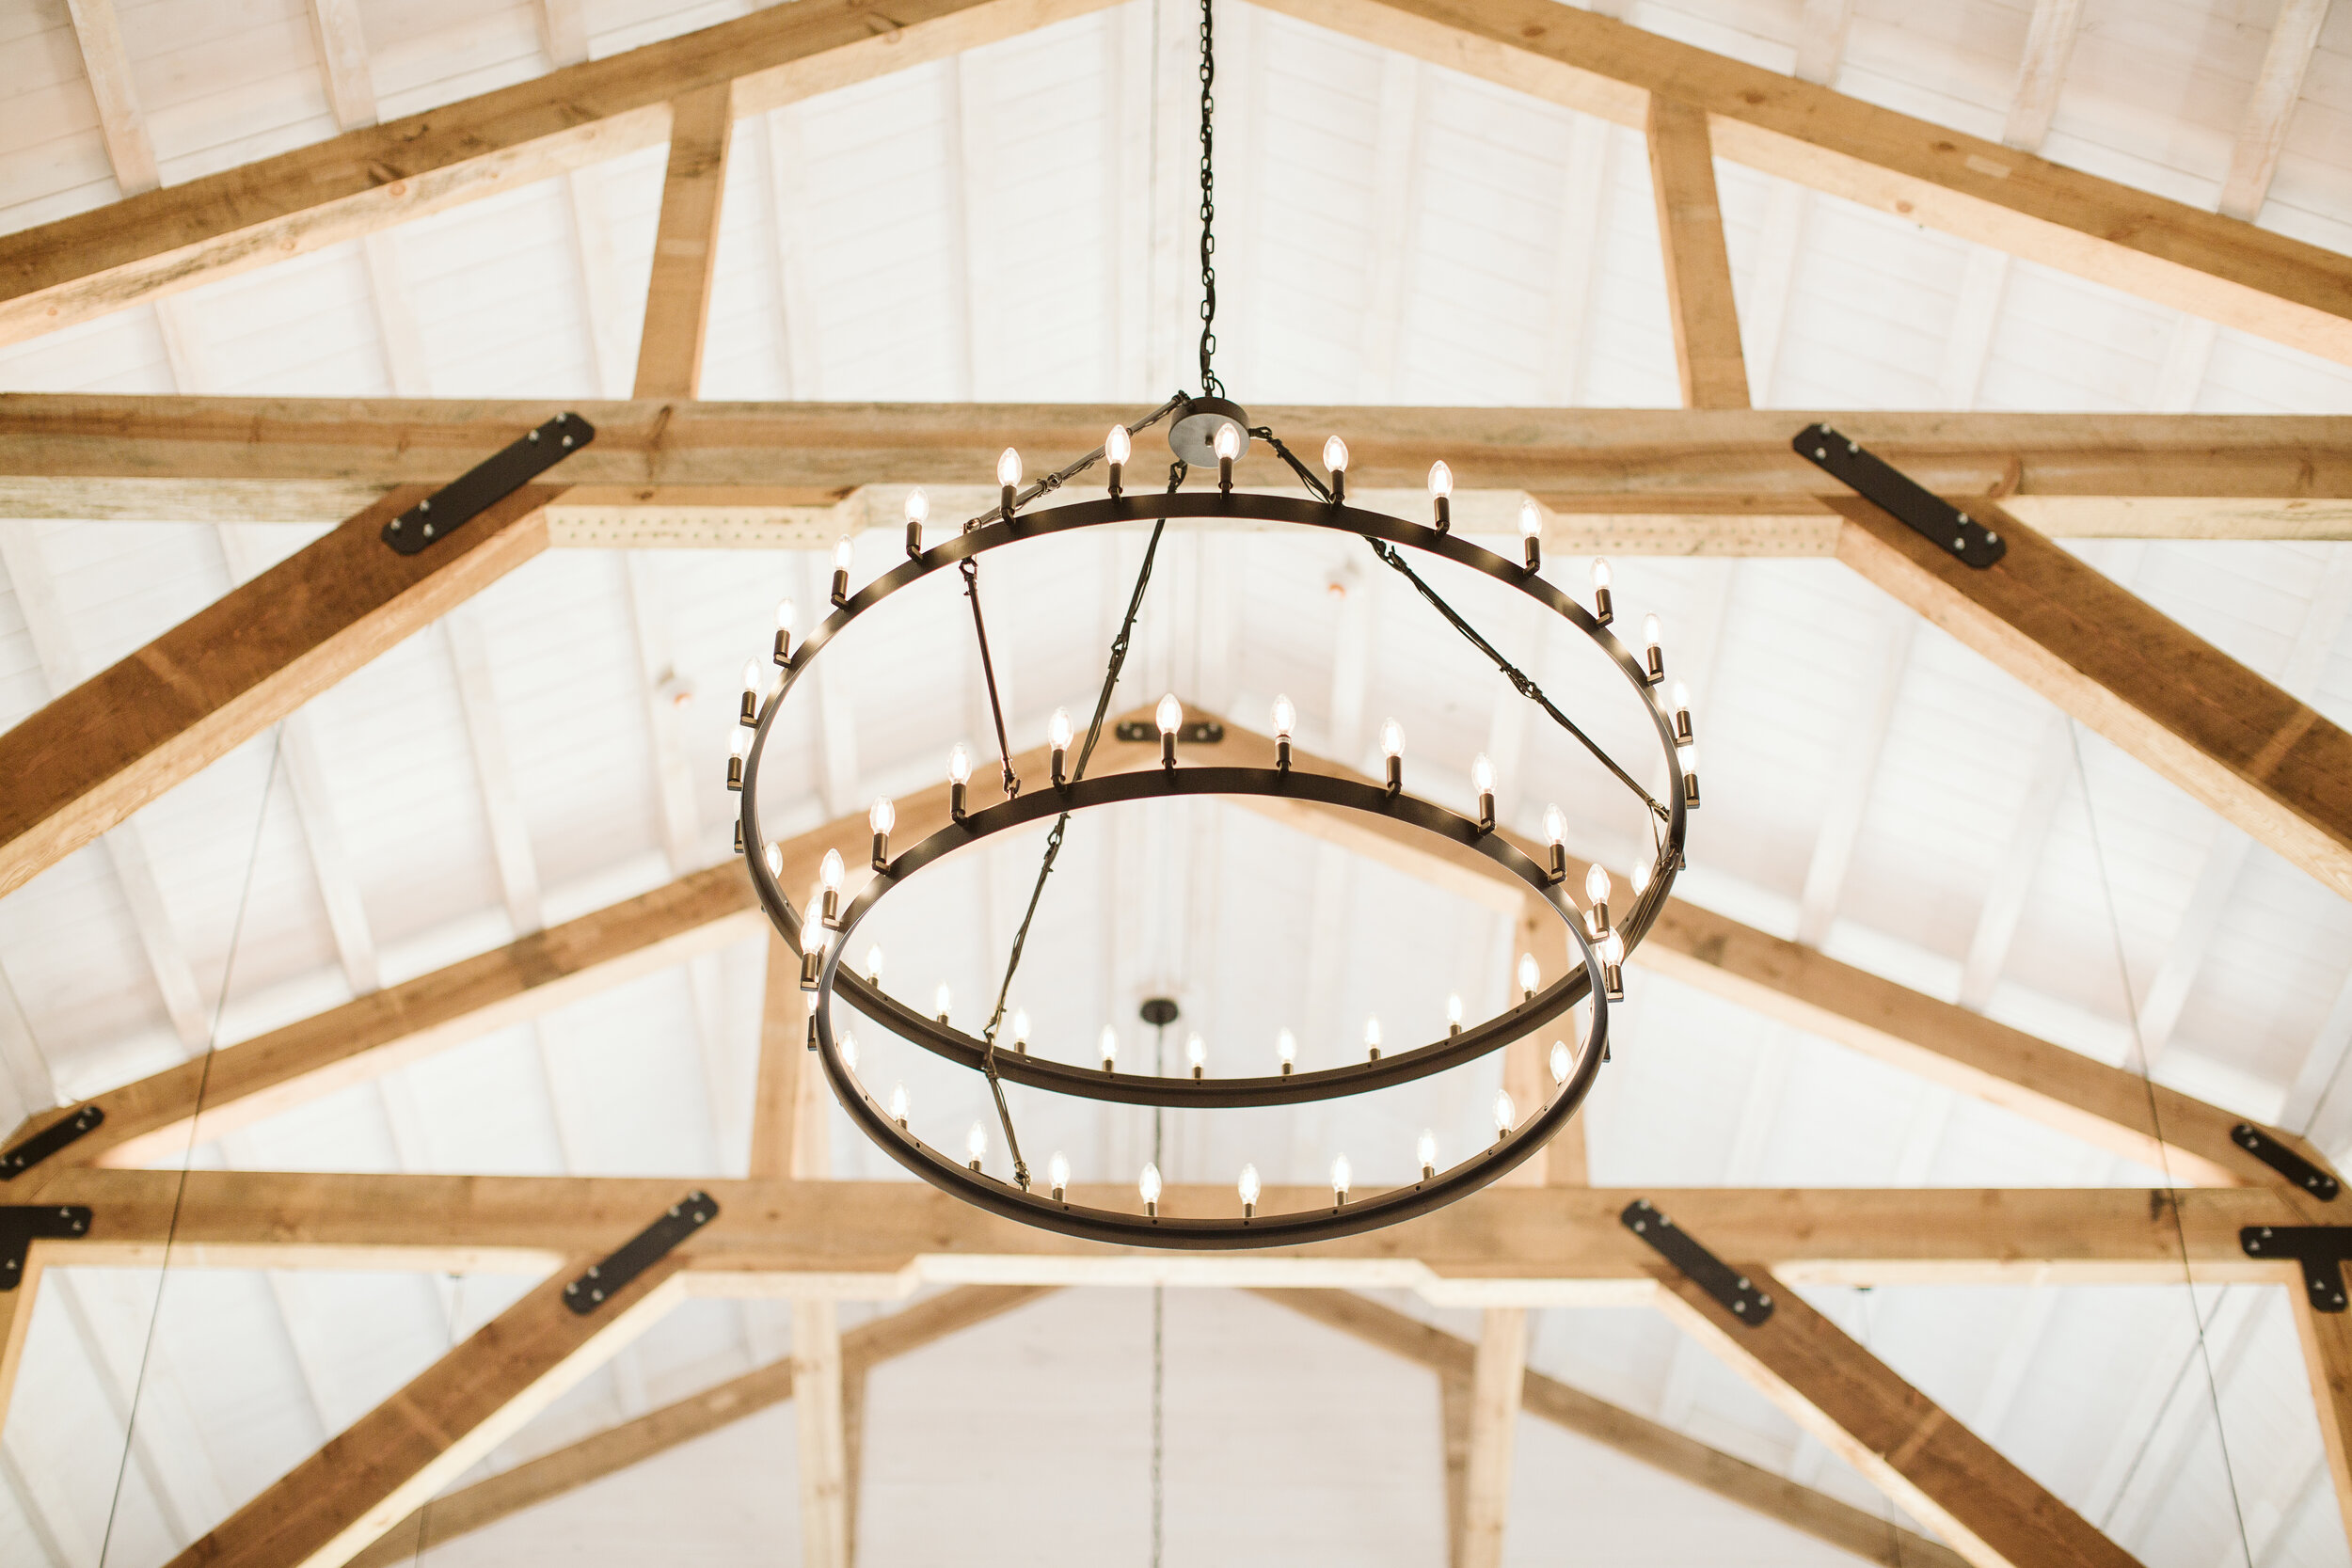  [PHOTO] One of three chandeliers in the Gambrel Room, featuring candle lights circling two metal rings 